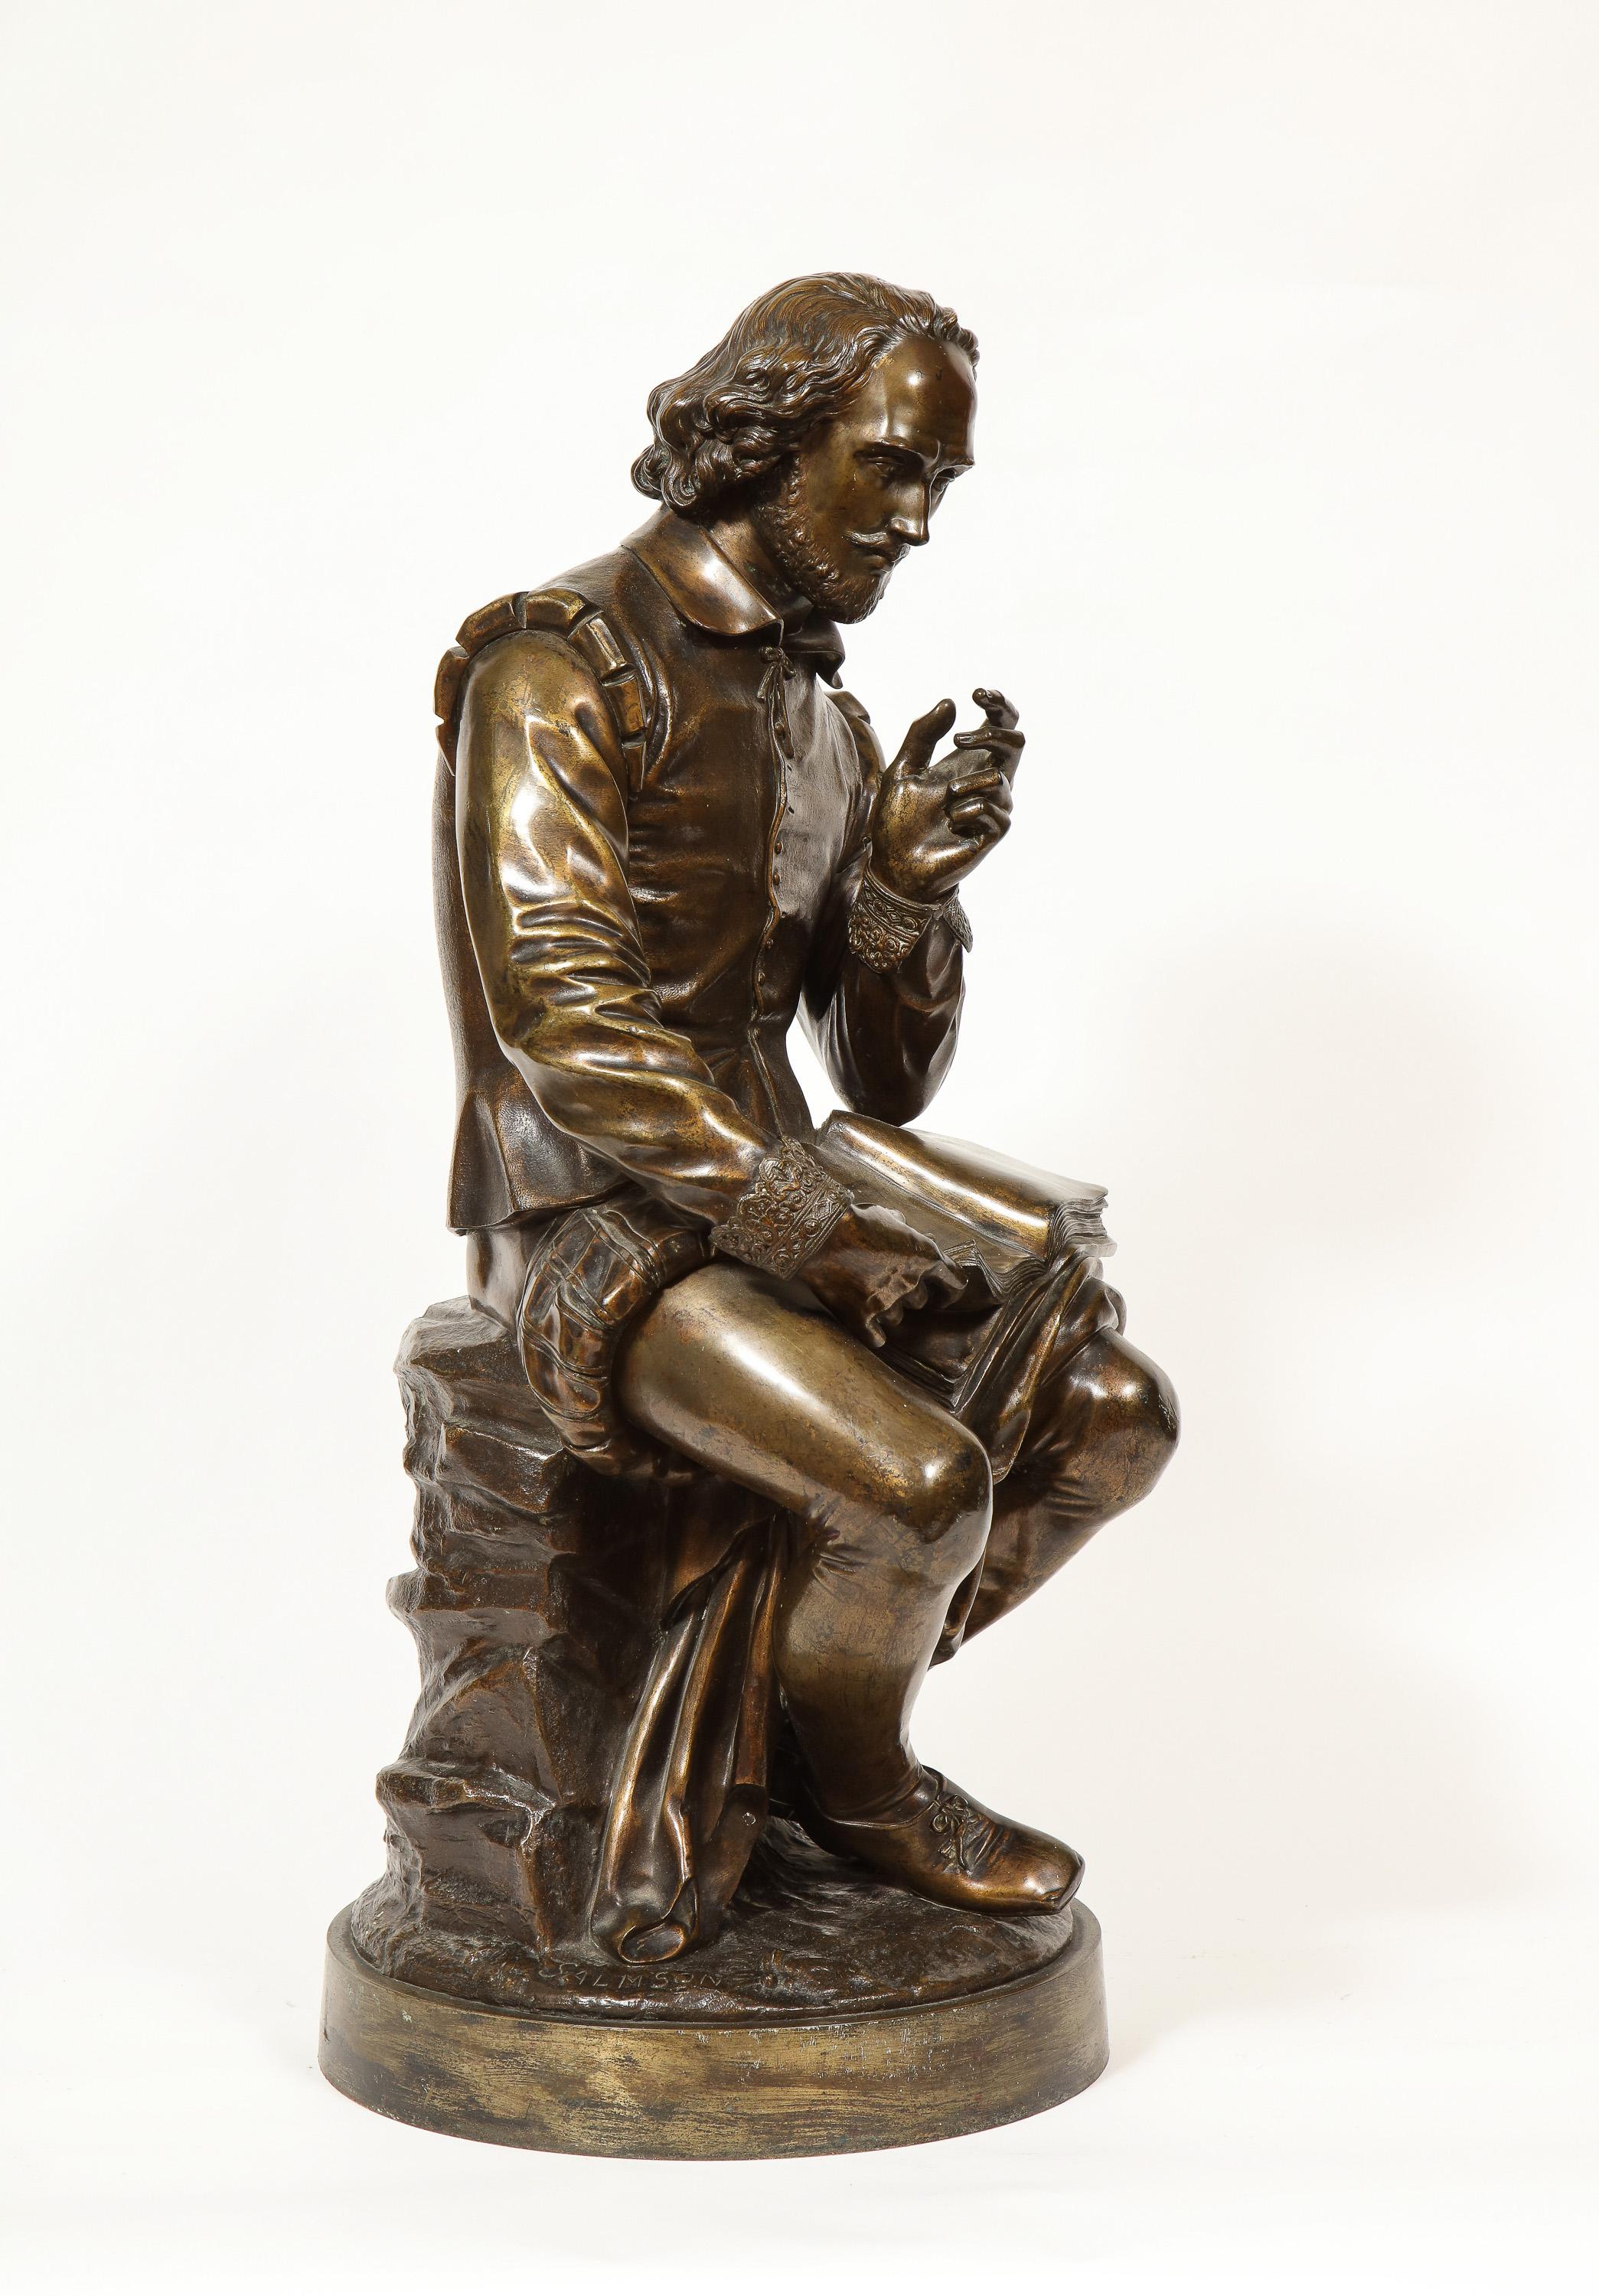 Jean Jules B. Salmson (French, 1823-1902) bronze sculpture of William Shakespeare seated with books, 19th century.

Very rare sculpture of the famous William Shakespeare. Bronzes of him and especially of this size are hard to find. Perfect fit for